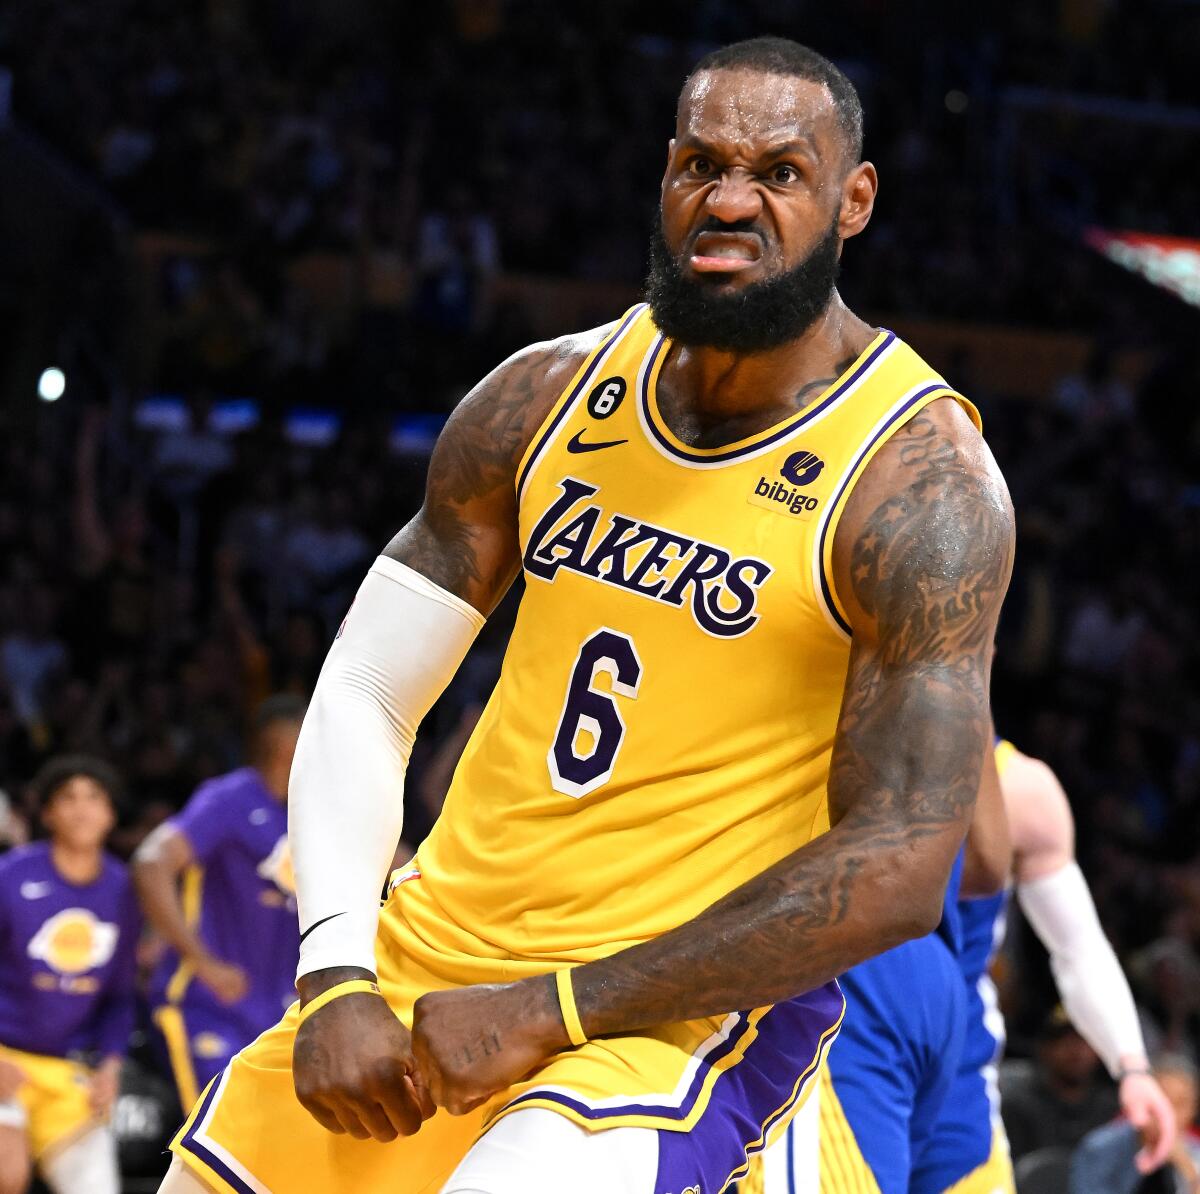 Lakers star LeBron James celebrates after scoring against the Golden State Warriors in Game 6.